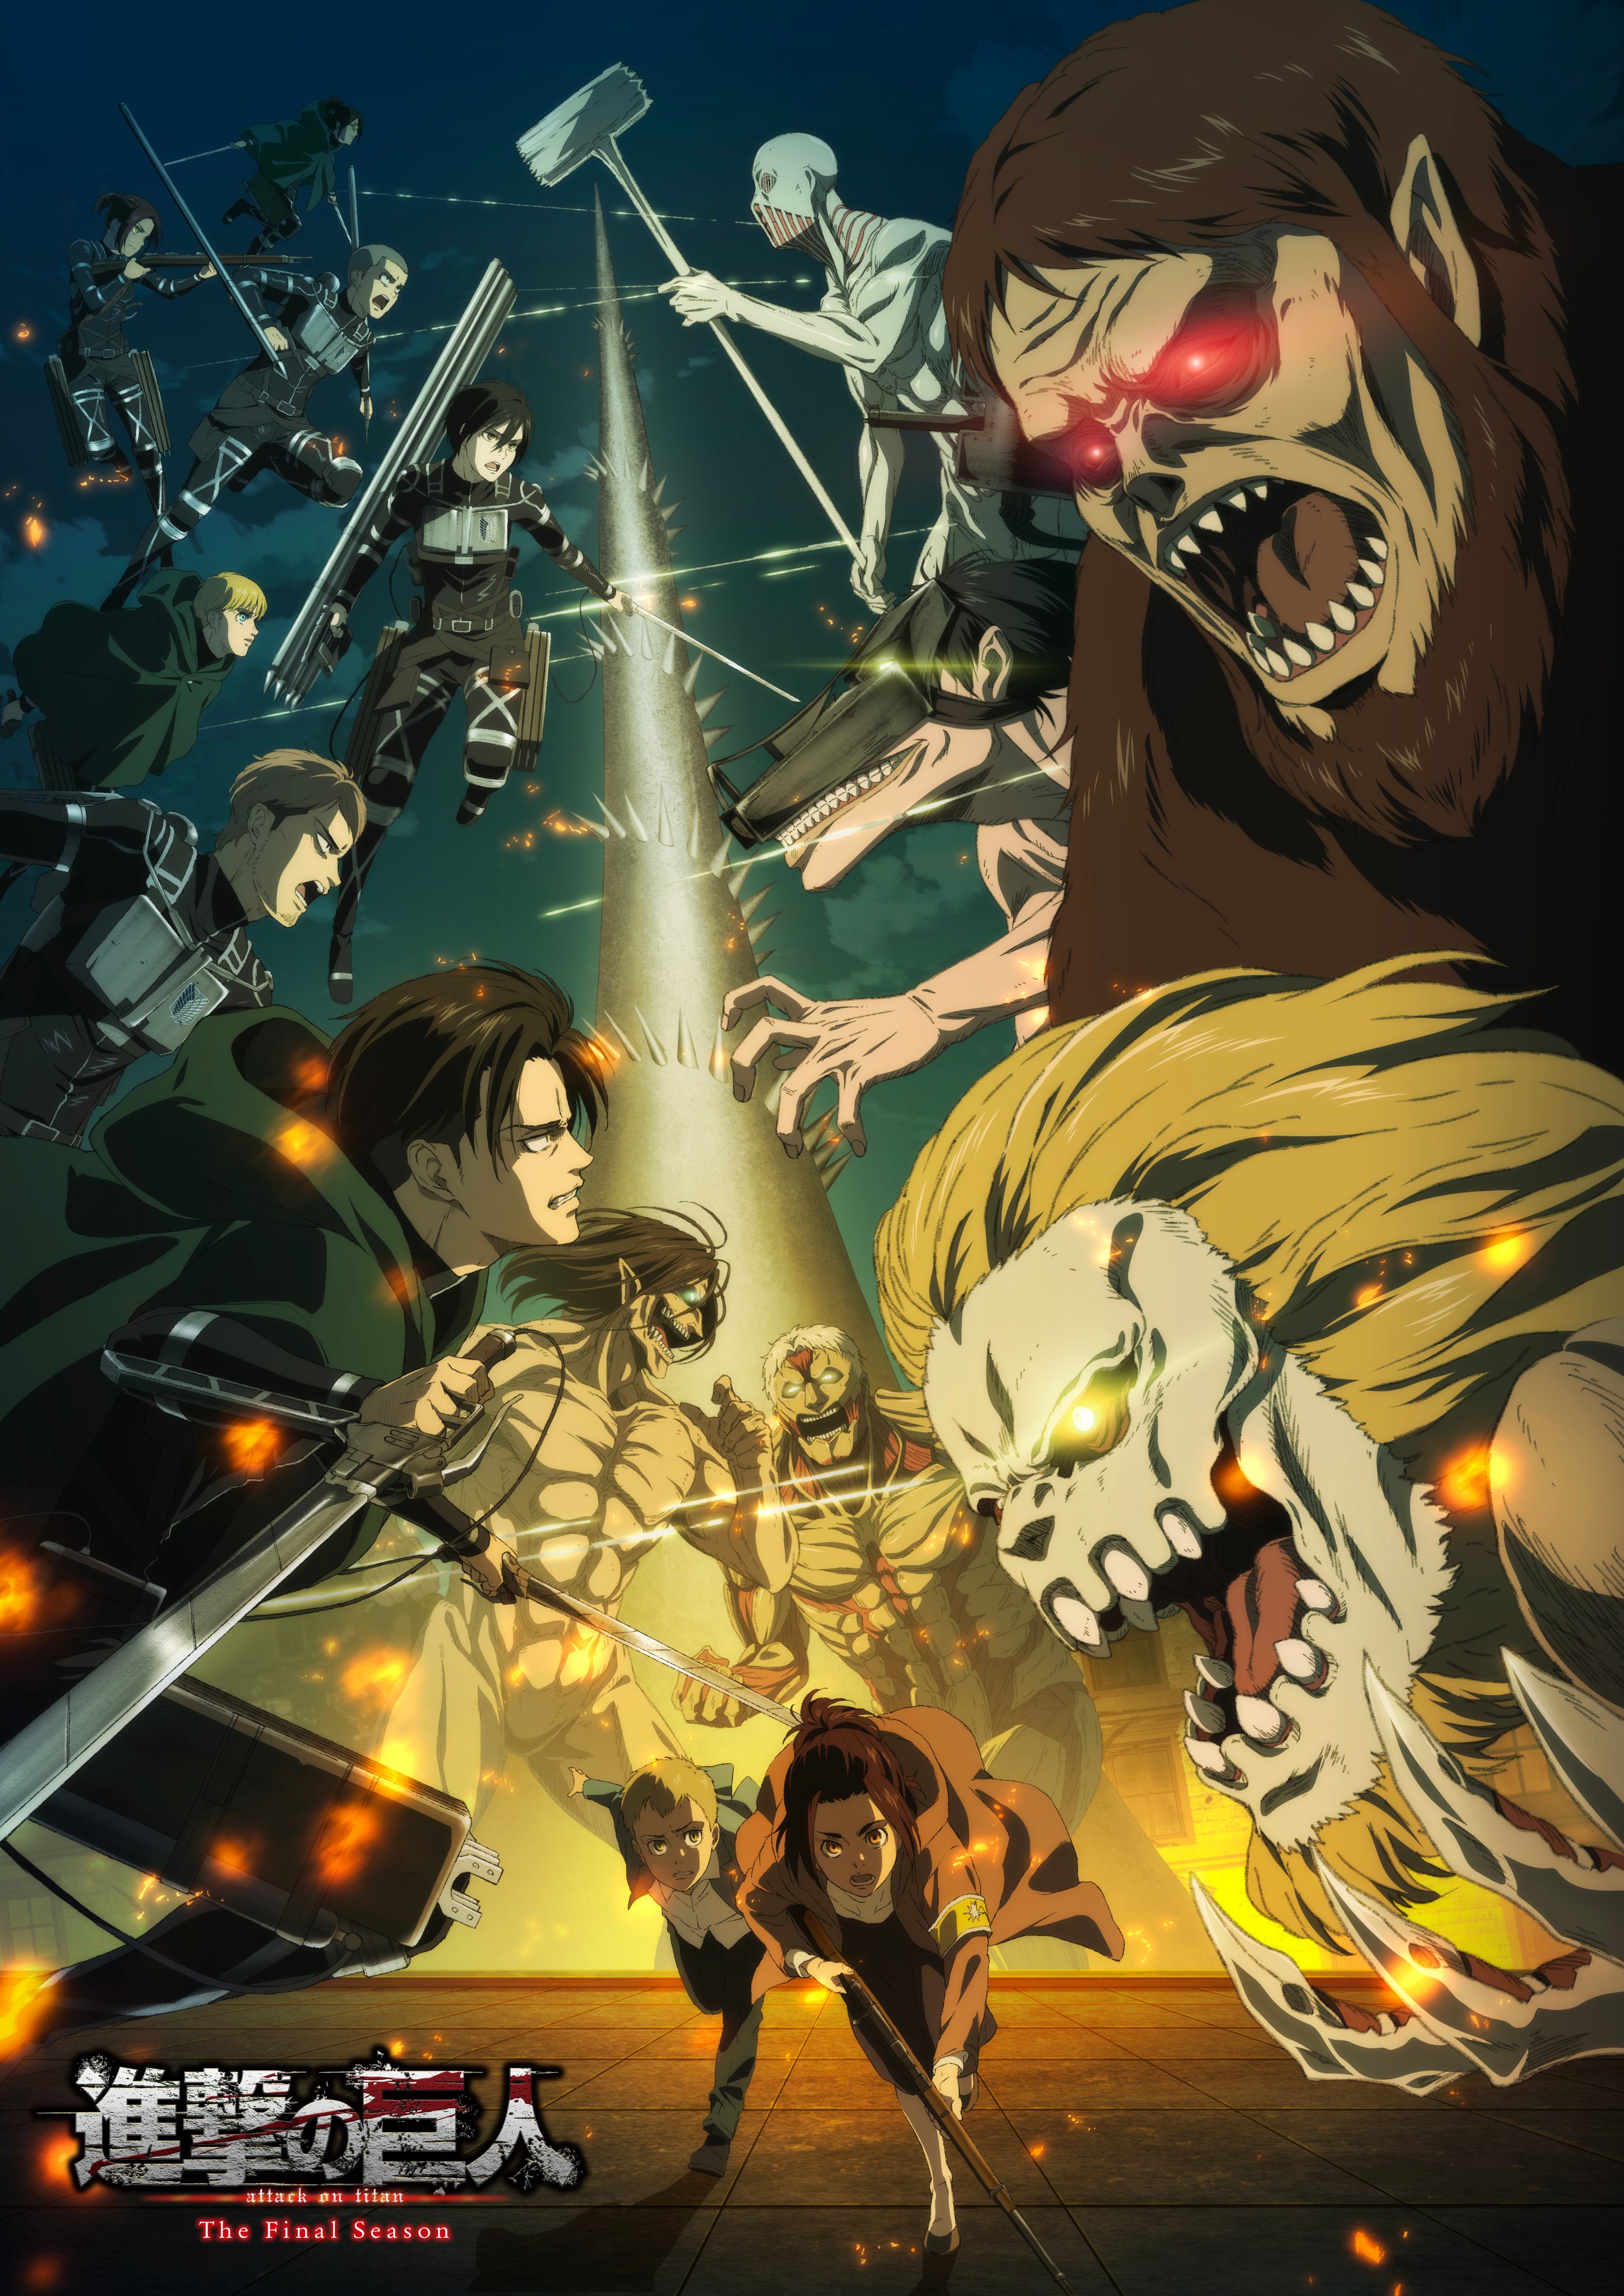 Attack On Titan Season 4 Episode 6 Release Date And How To Watch Online Watch32 is the best website where you can watch tons of movies just for free and very simple without register, you can watch any movies you want for free. attack on titan season 4 episode 6